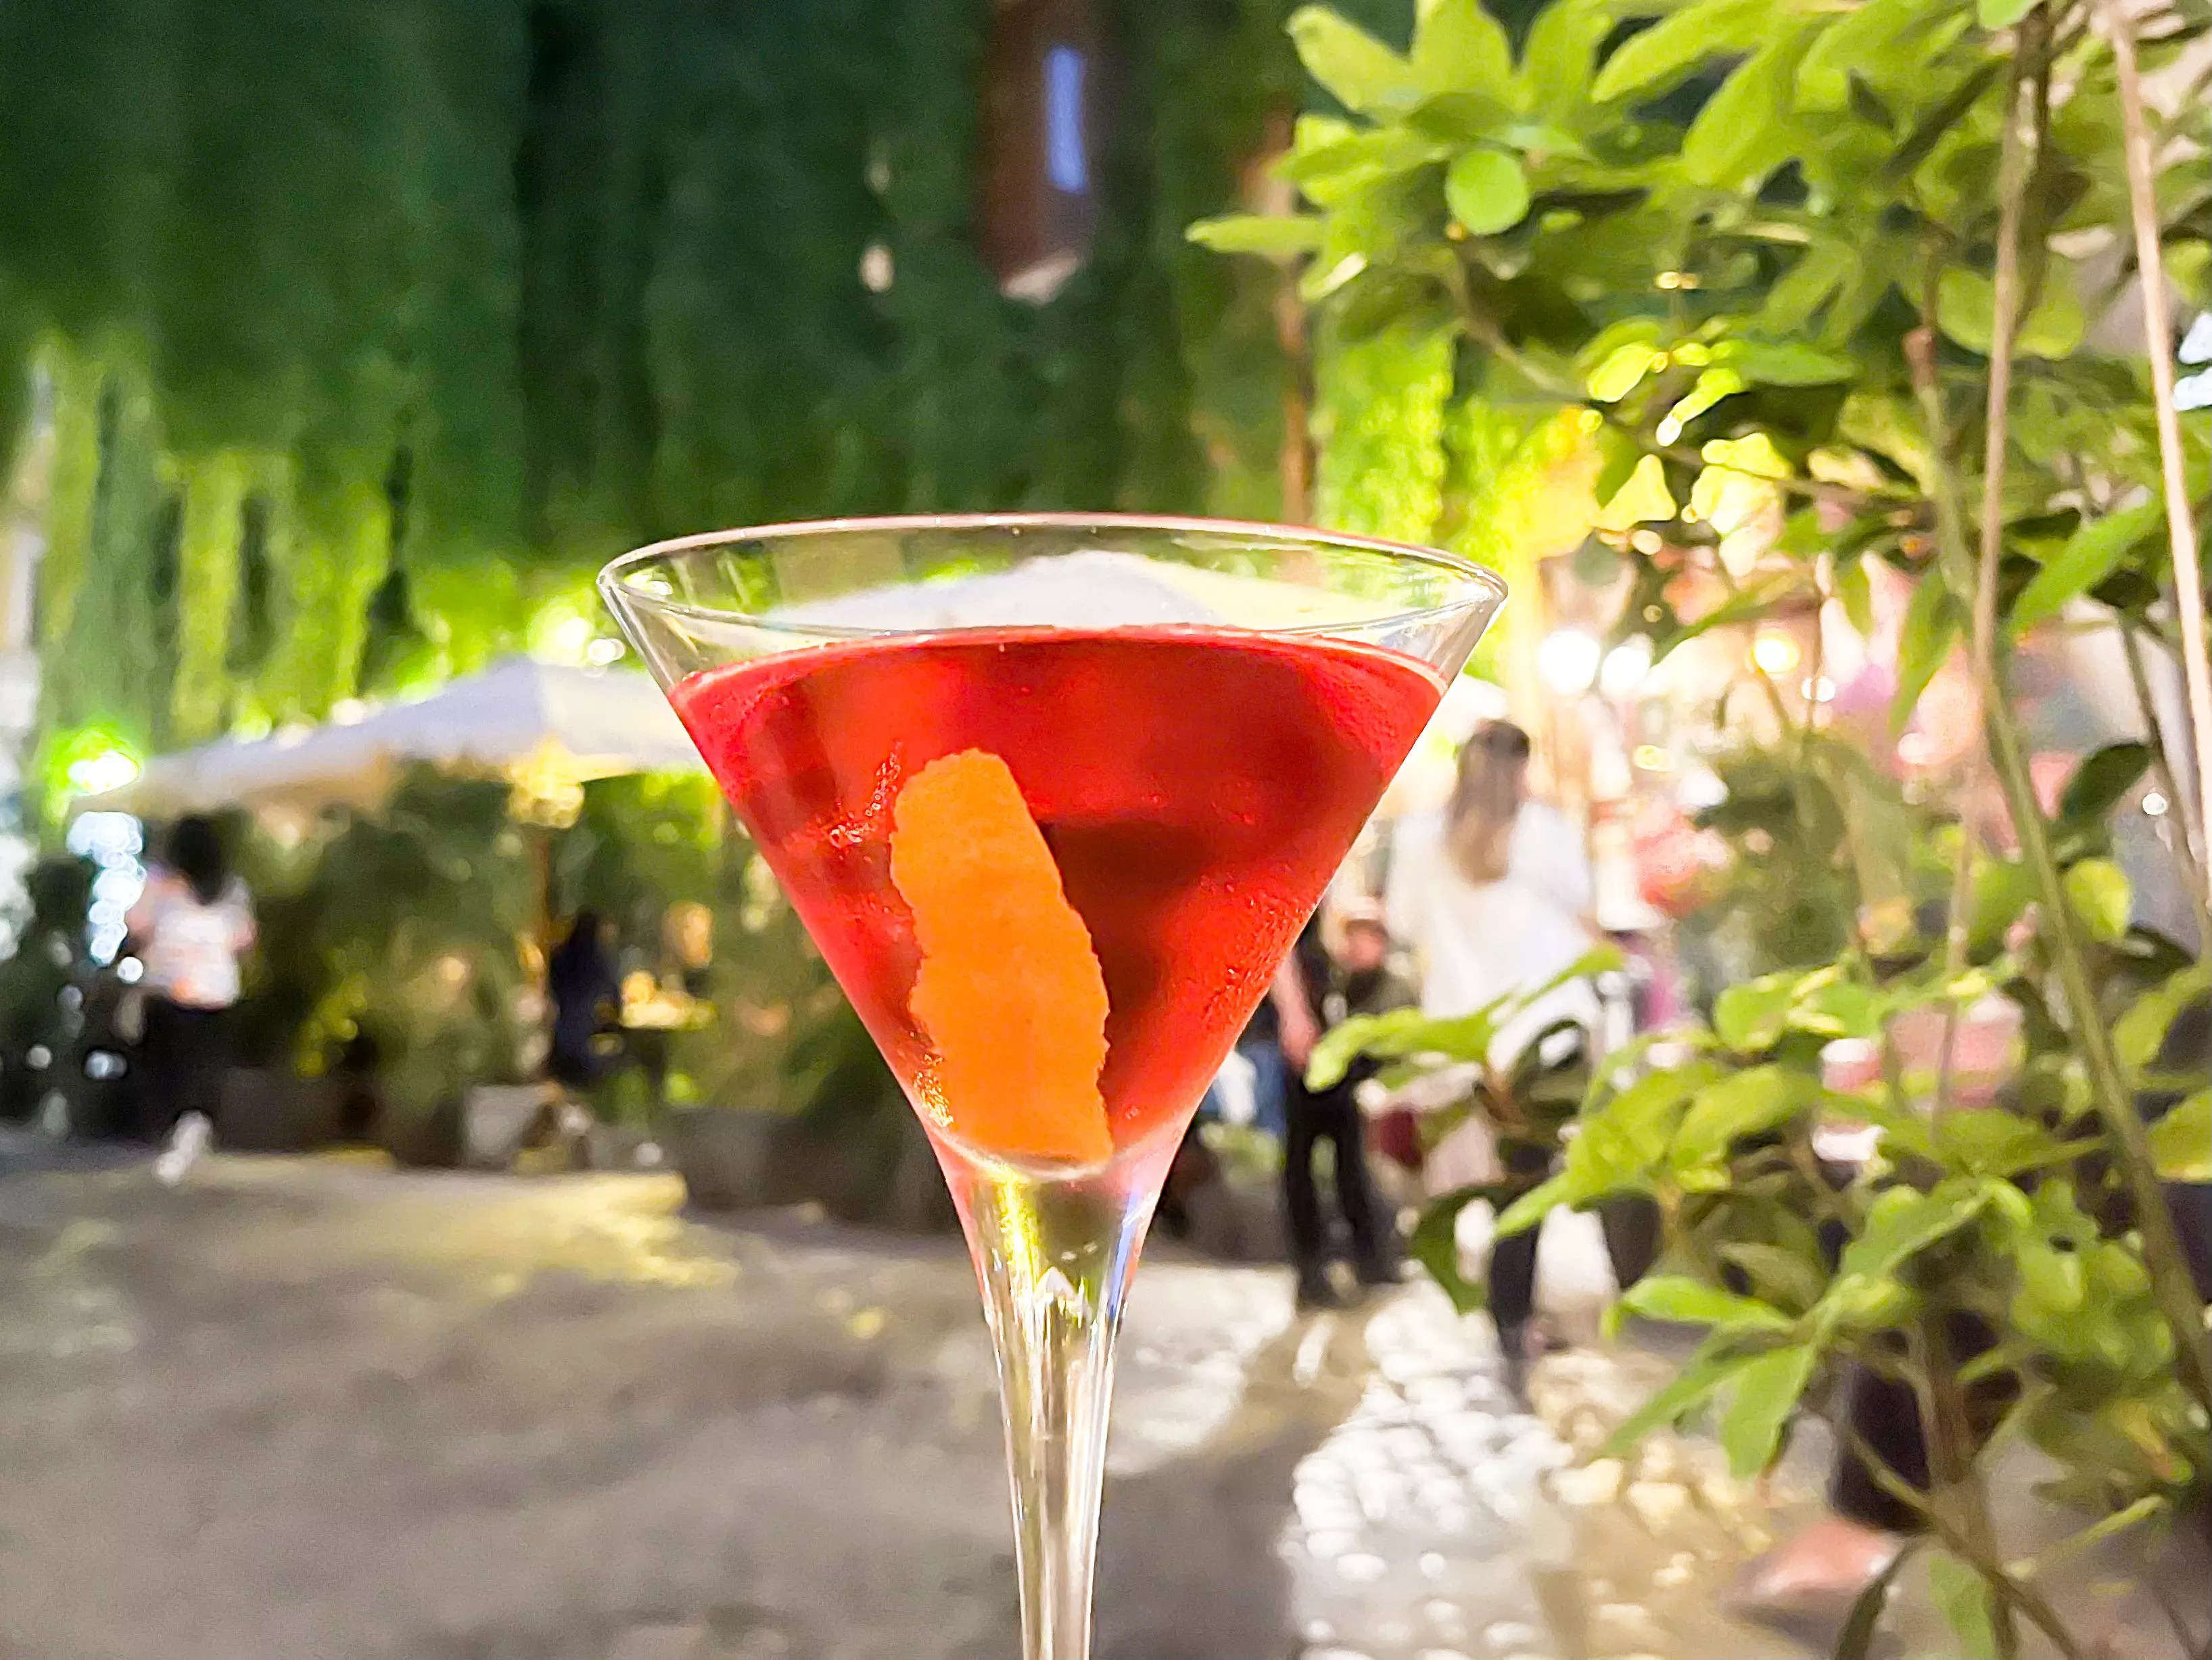 A Cardinale cocktail on a table in front of a vine covered building.